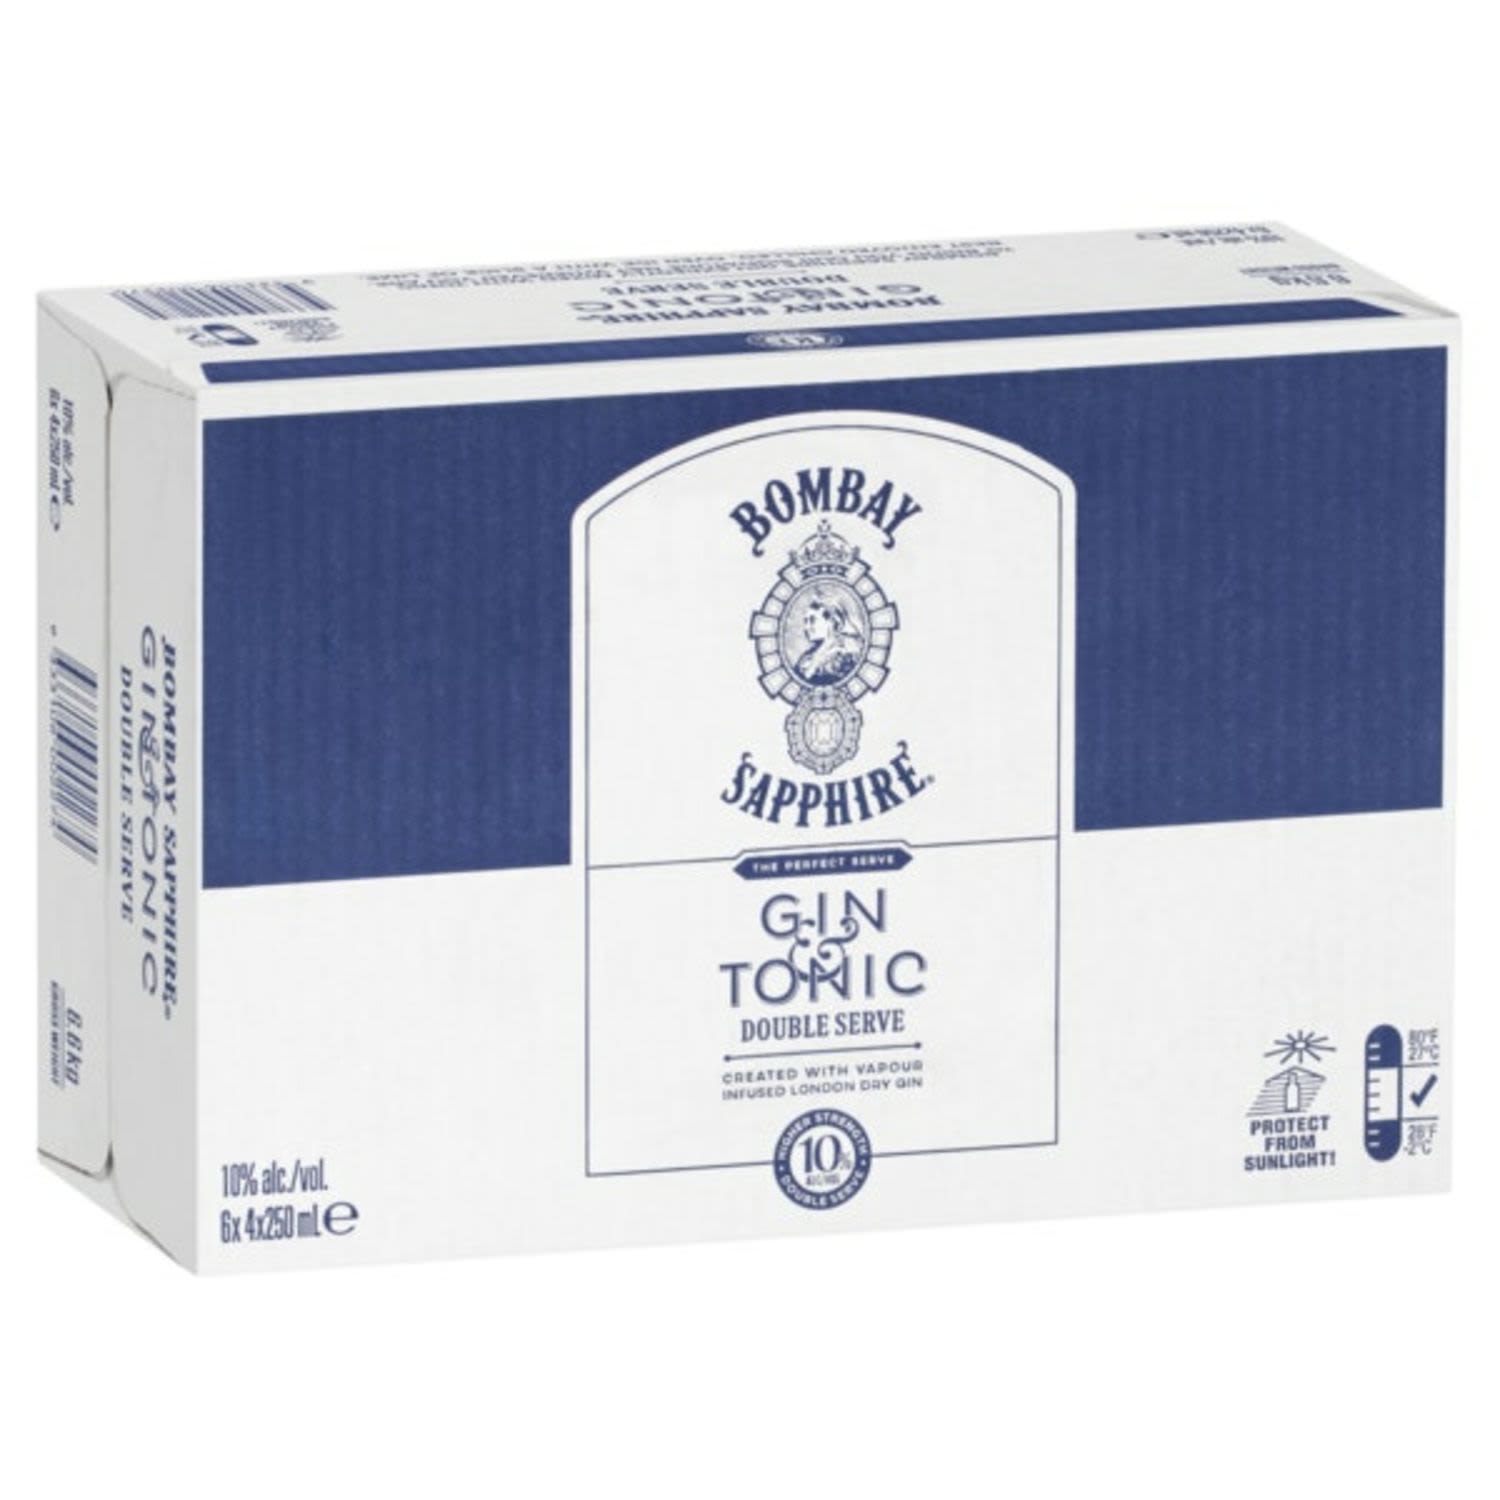 Bombay Sapphire Gin and Tonic Double Serve 10% Can Case 250mL 24 Pack